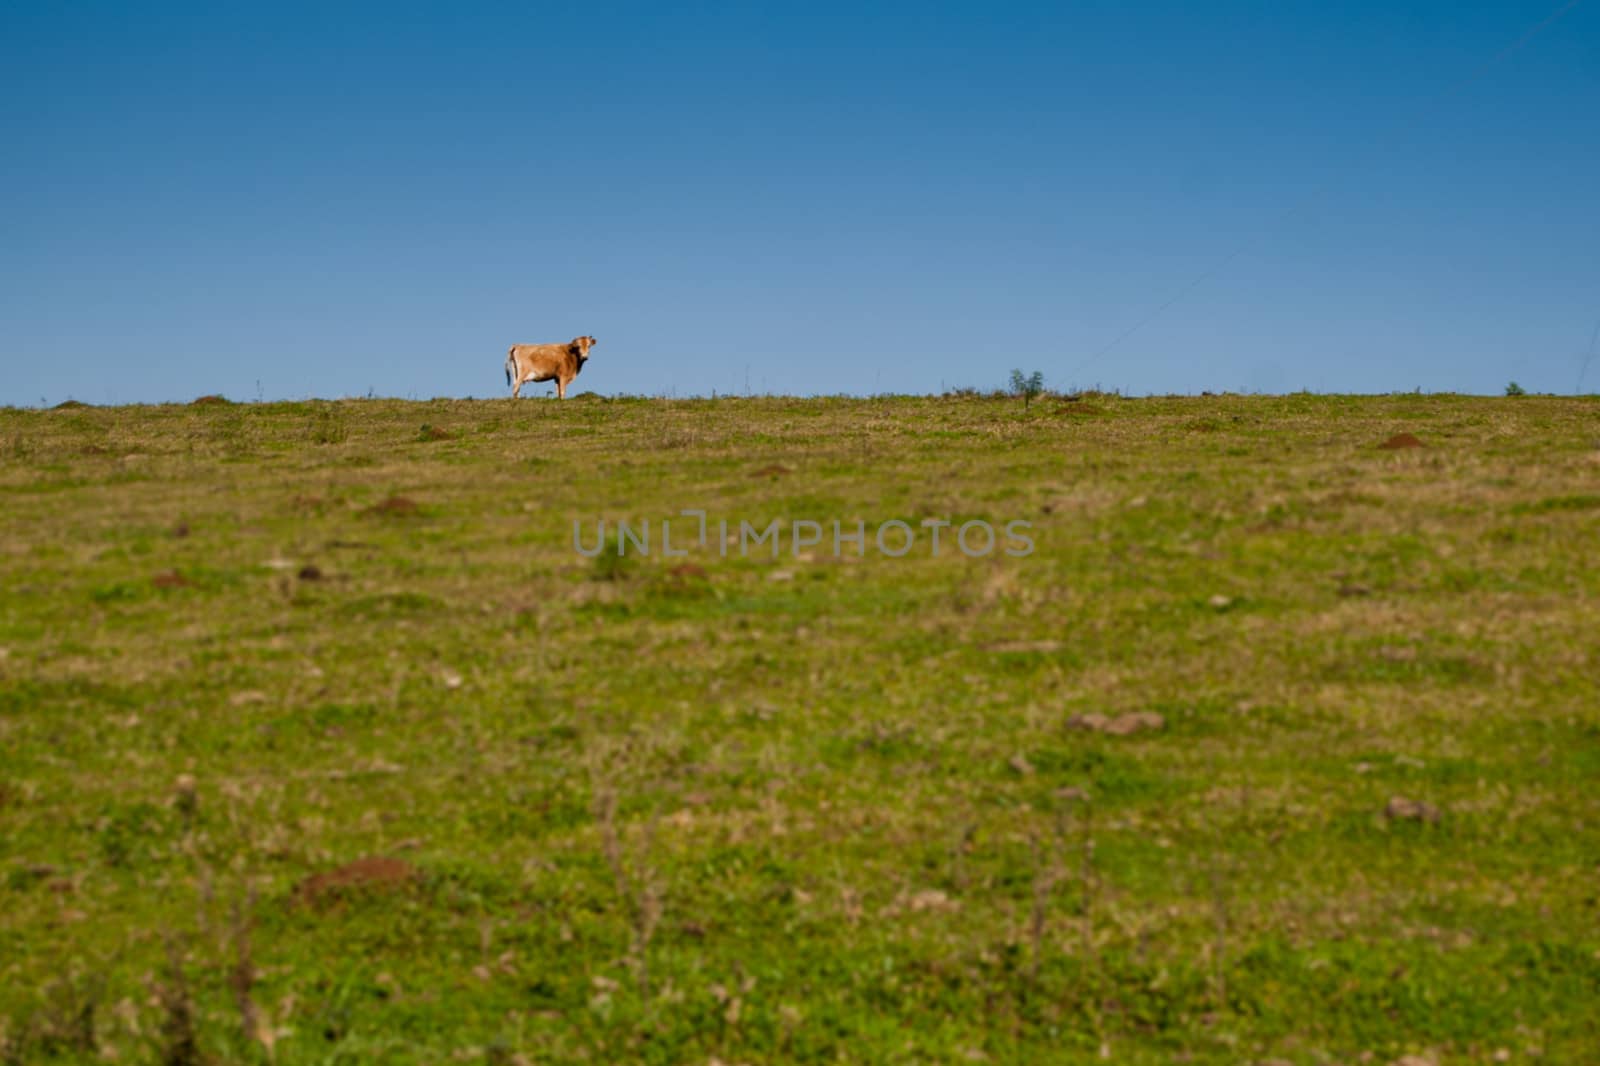 Lone cow on green grassland with blue sky in the background, southern Brazil.